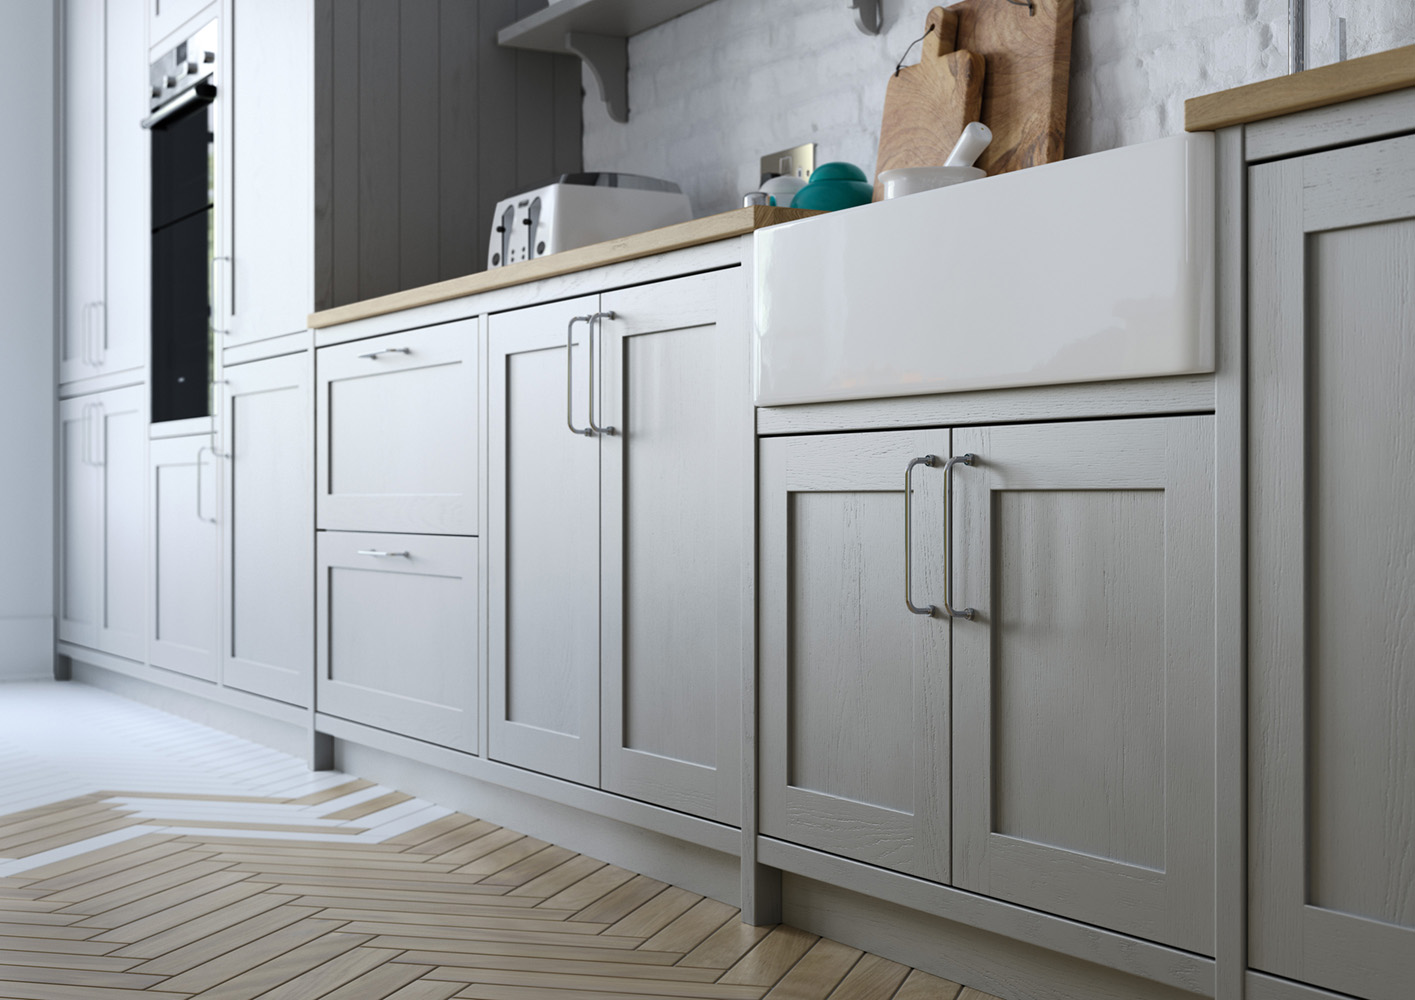 Alana Dust Grey shaker kitchen by The Kitchen Depot cabinets and belfast sink